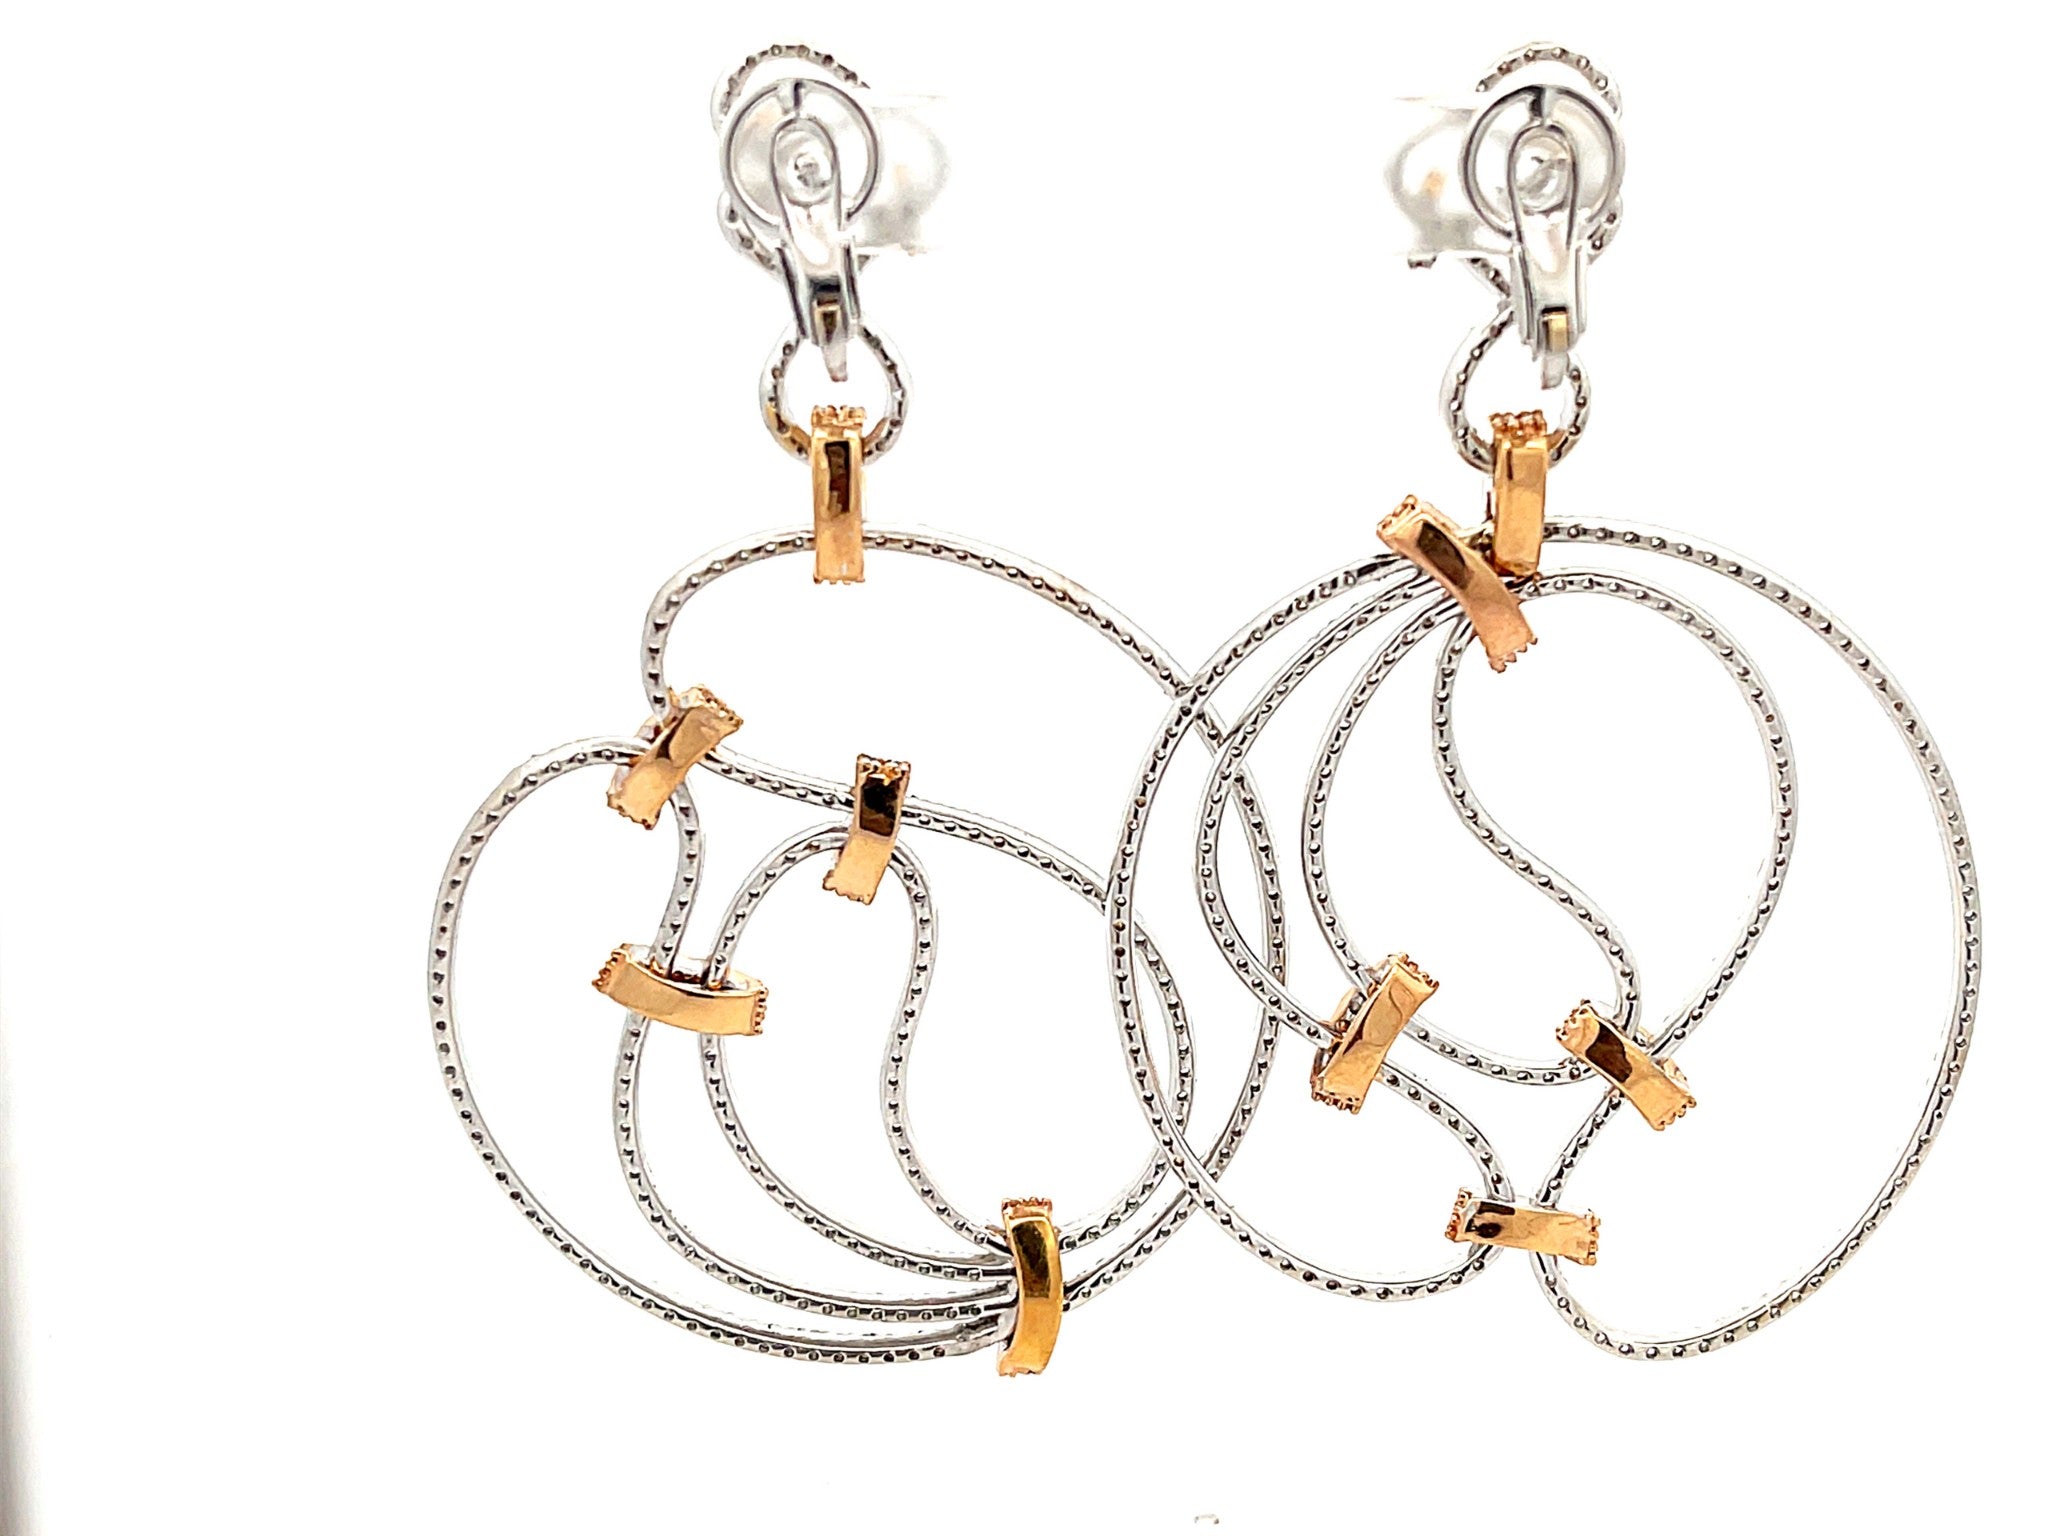 6.74 Carat Large Diamond Earrings in 18k White Gold With Rose Gold Accents